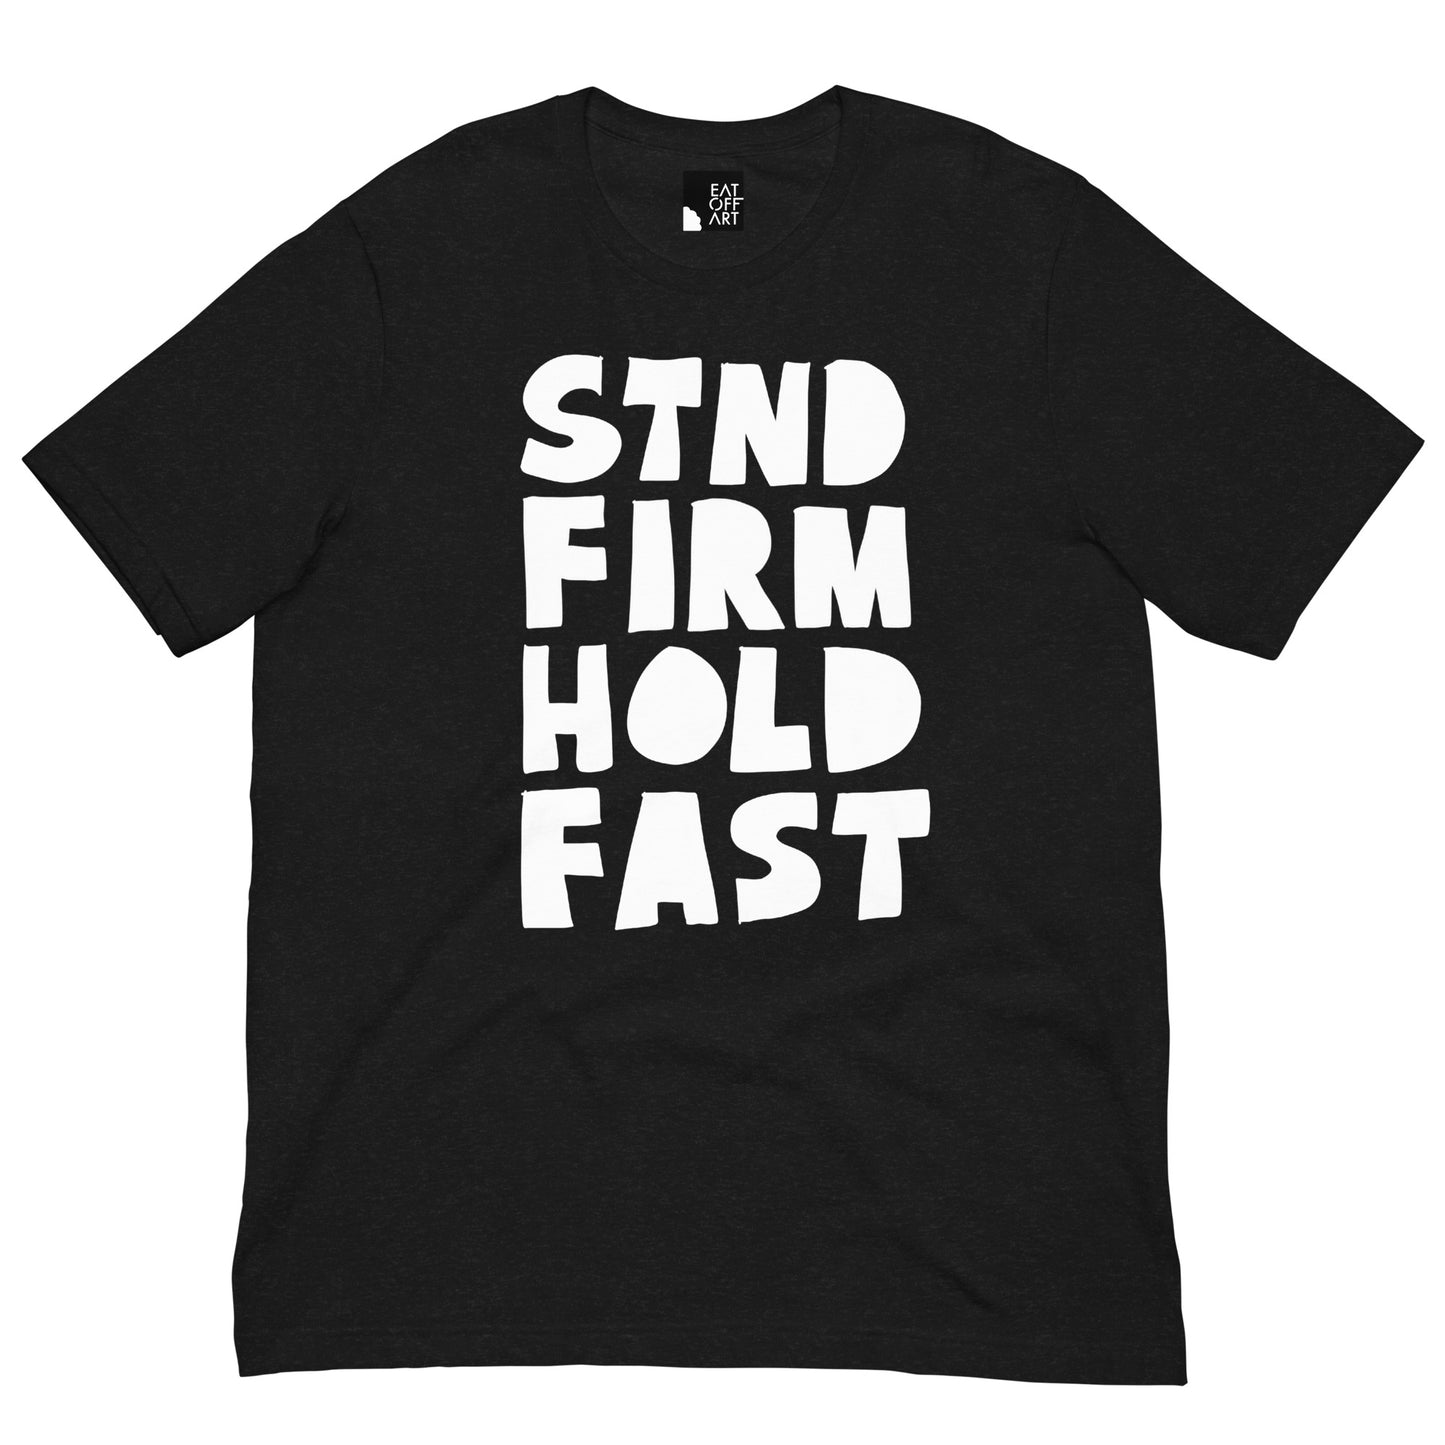 STND FIRM - HOLD FAST Unisex Tee